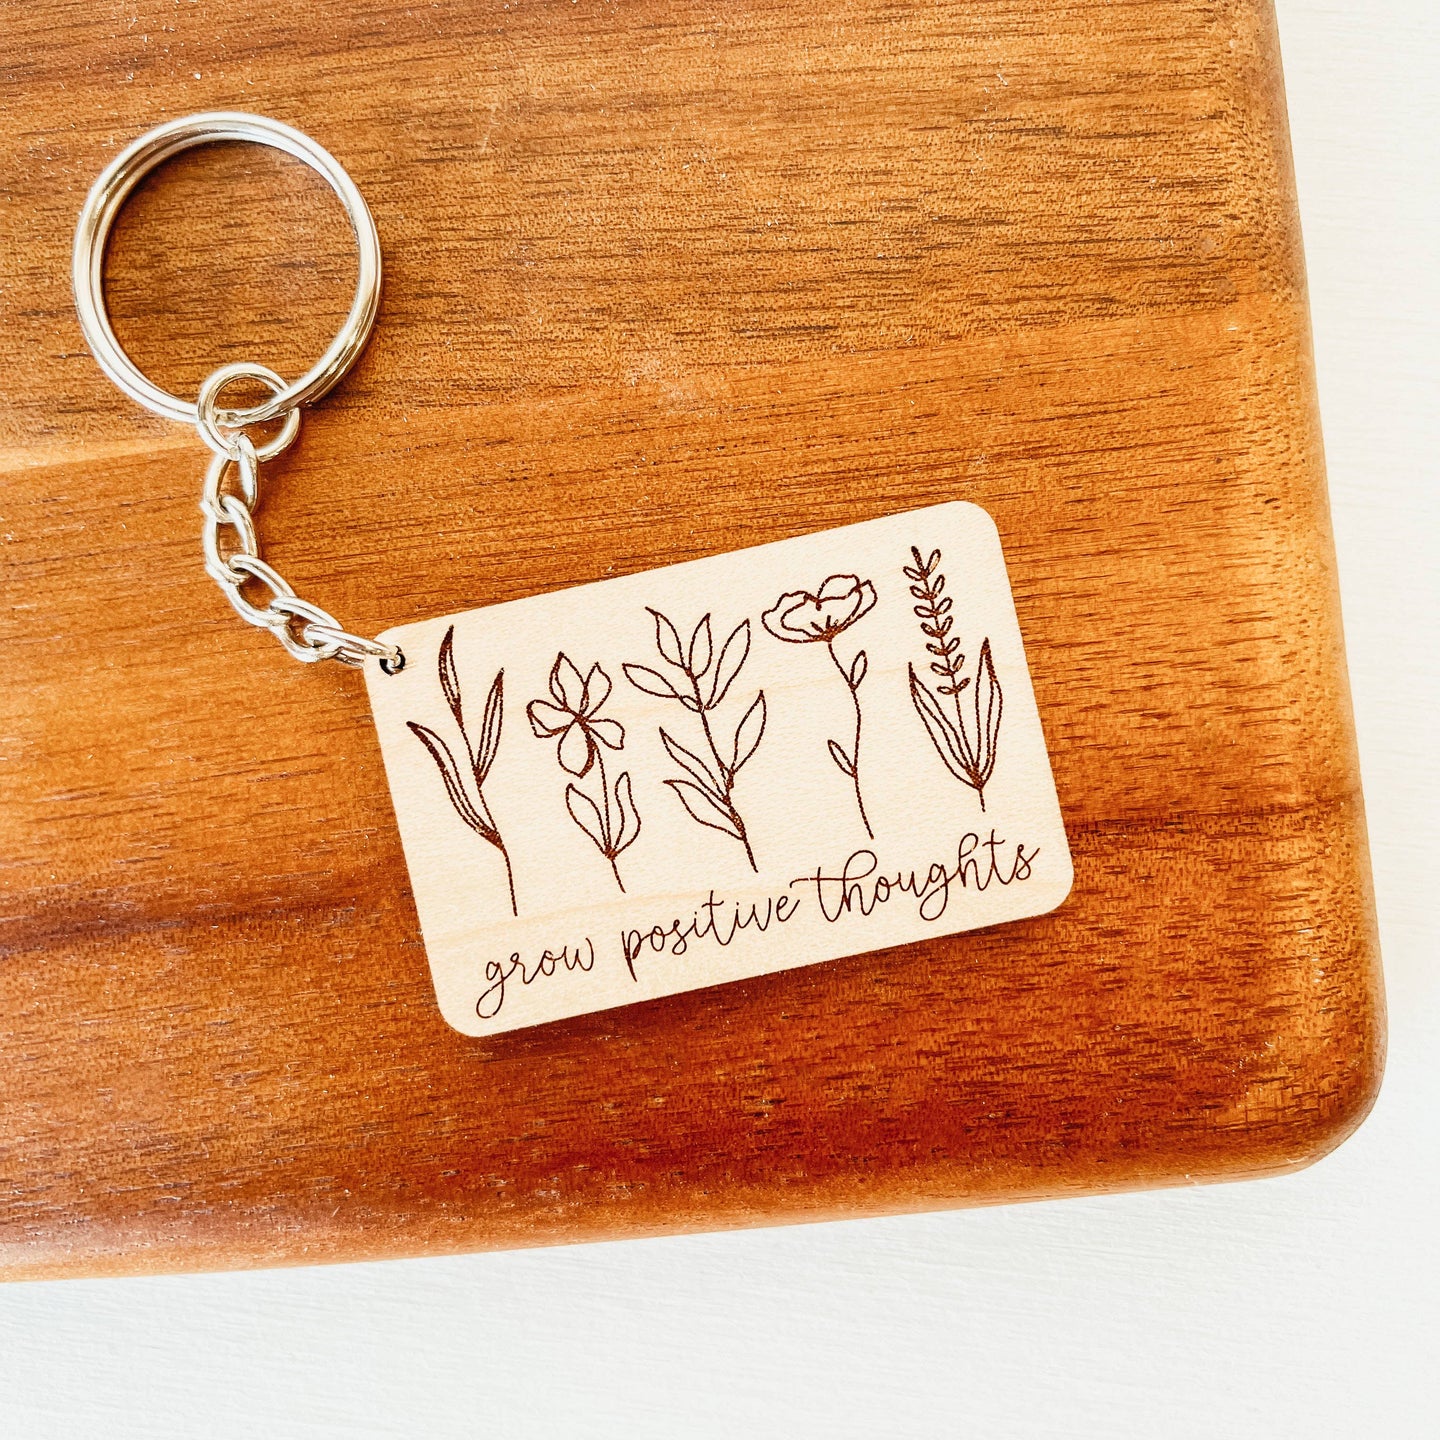 Grow Positive Thoughts Wooden Keychain